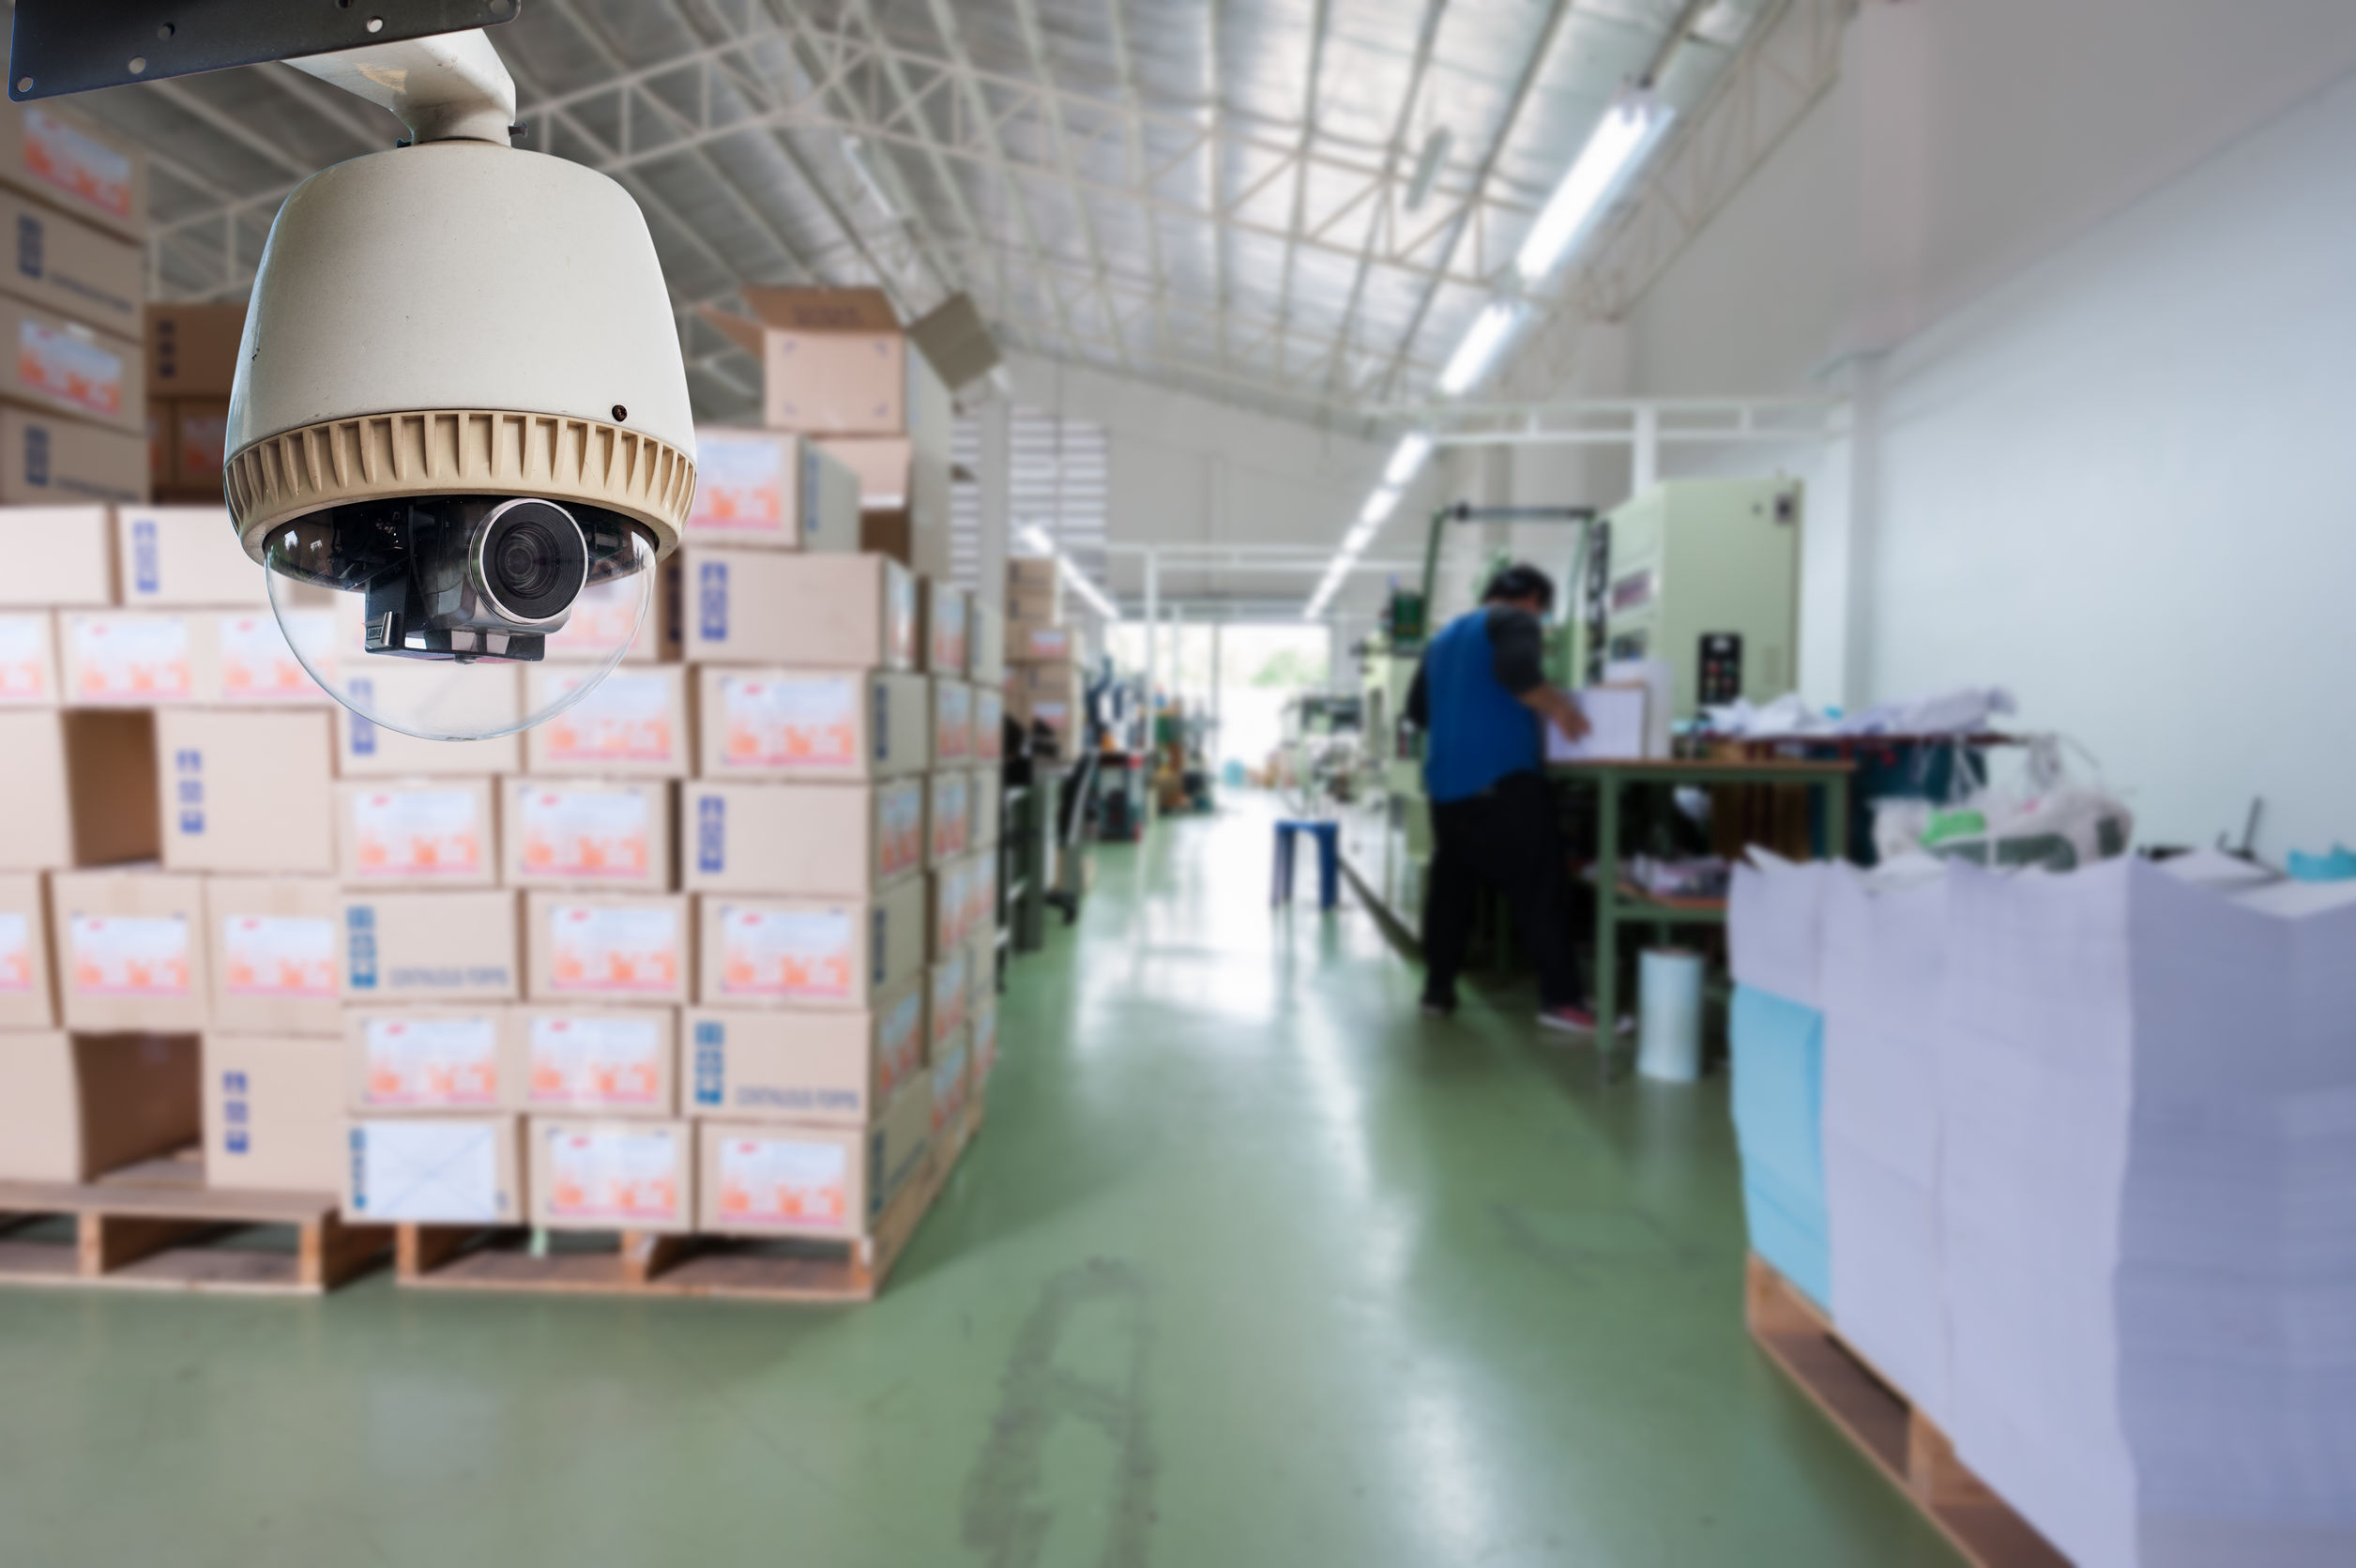 27108211 - cctv camera or surveillance operating in store or warehouse